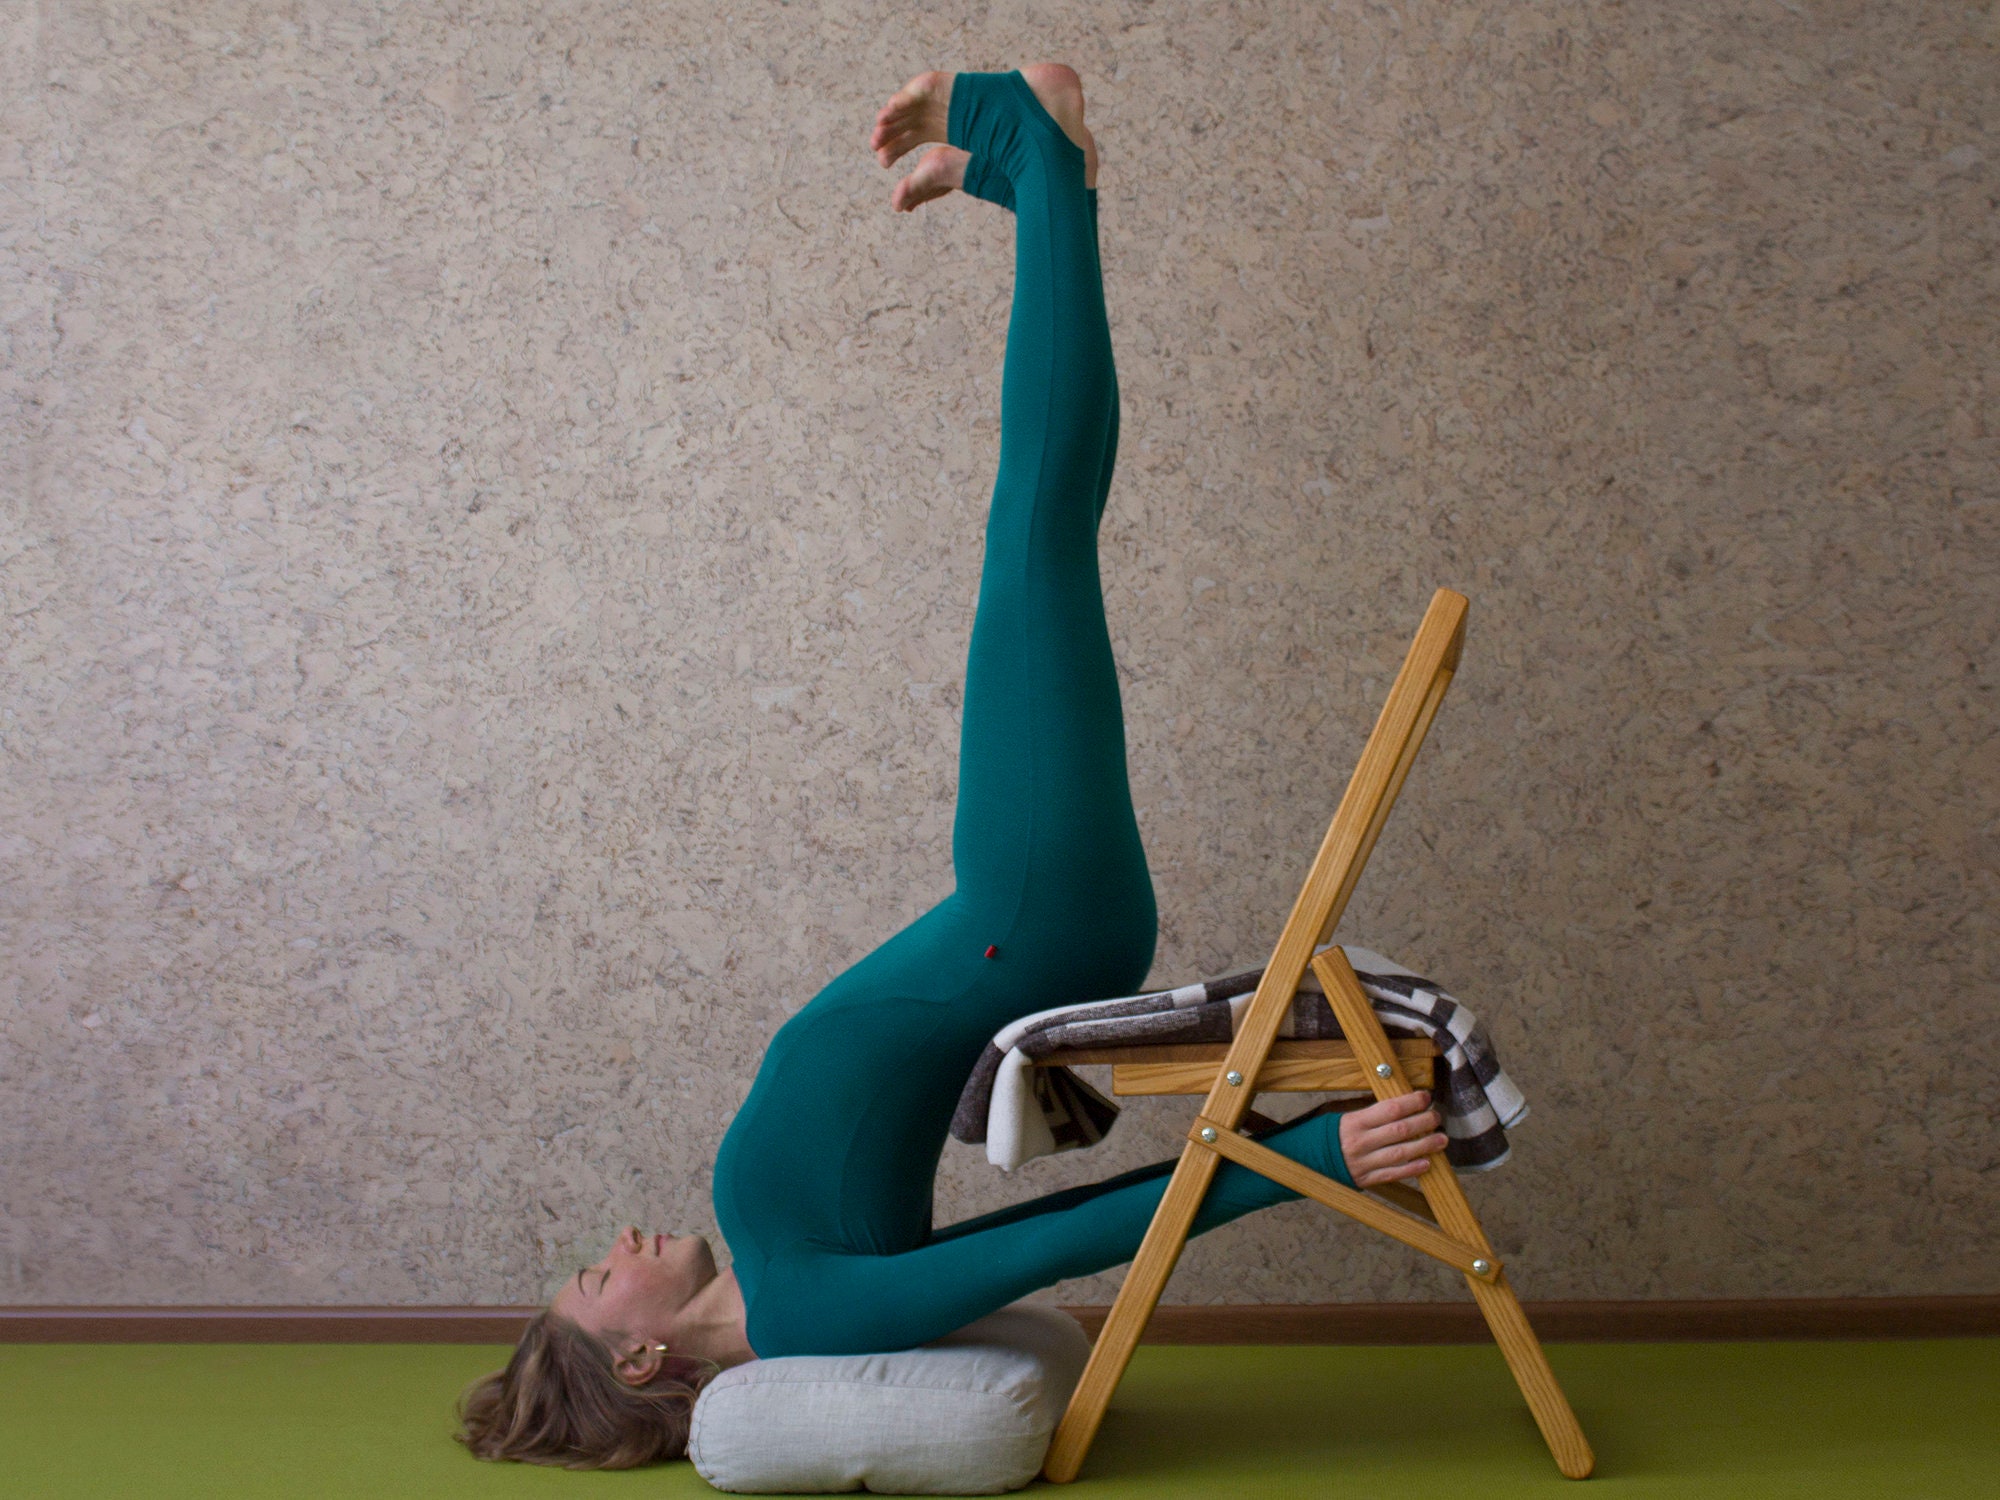 Yoga teacher practicing in studio with wooden walls and floor. Yogi using  chair for parsvottanasana pose. Iyengar yoga instructor with chair as prop  to help in posture, slow motion Stock Video Footage